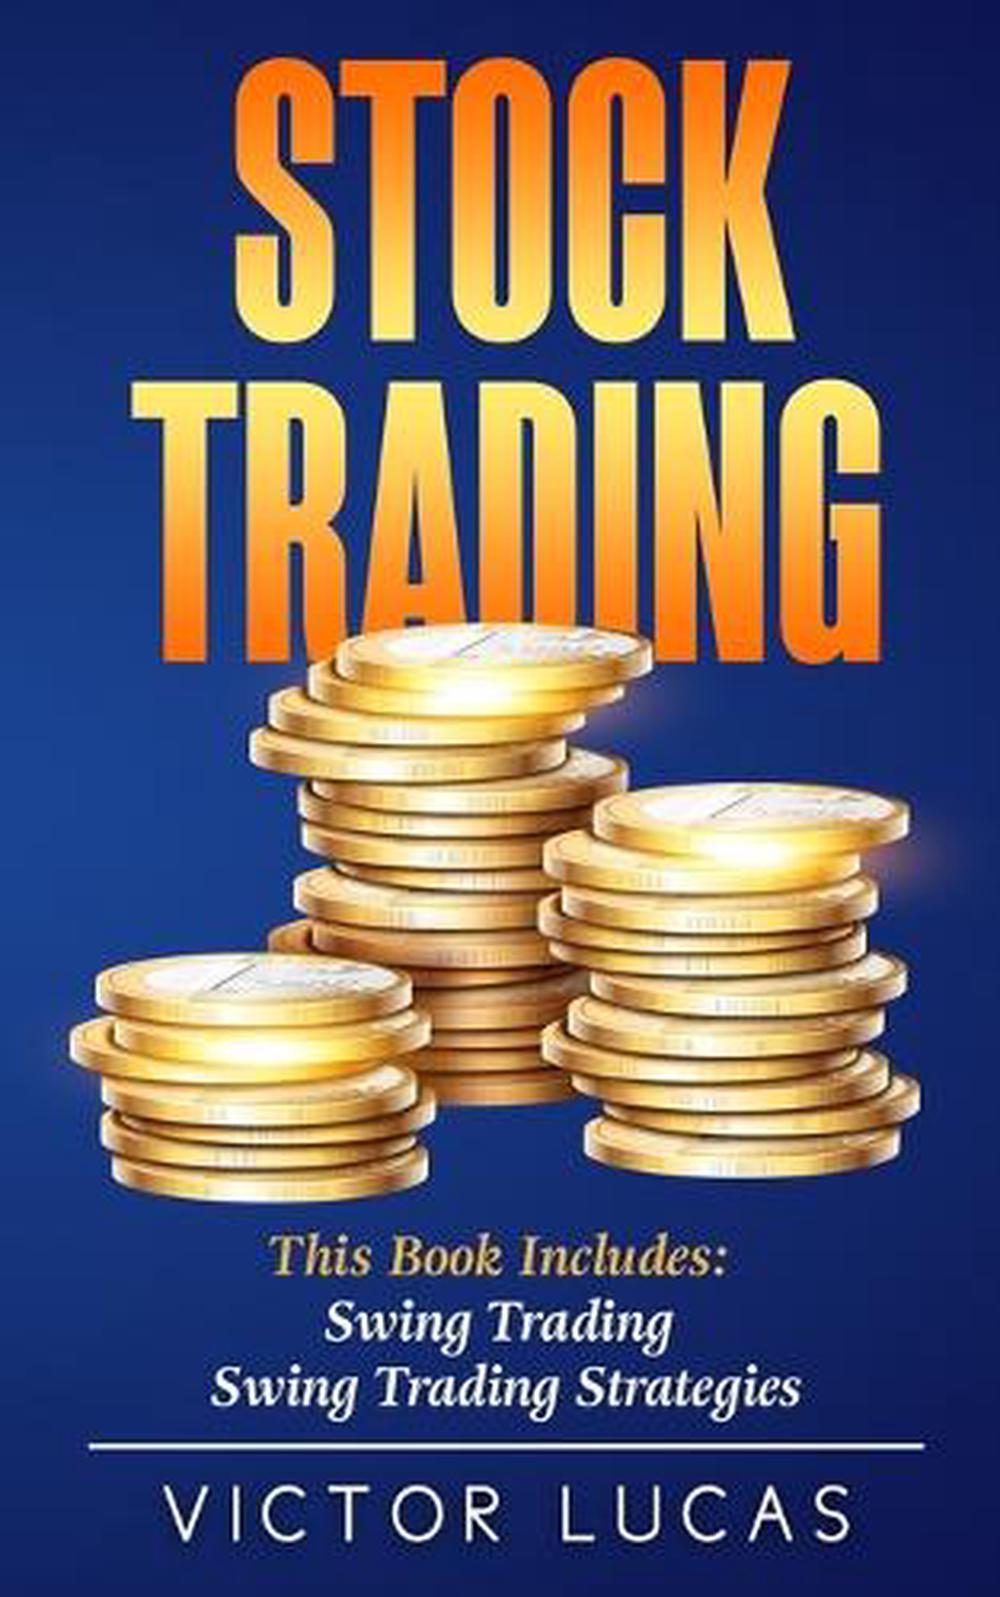 Stock Trading This book includes Swing Trading, Swing Trading Strategies by Vi 9781922320452